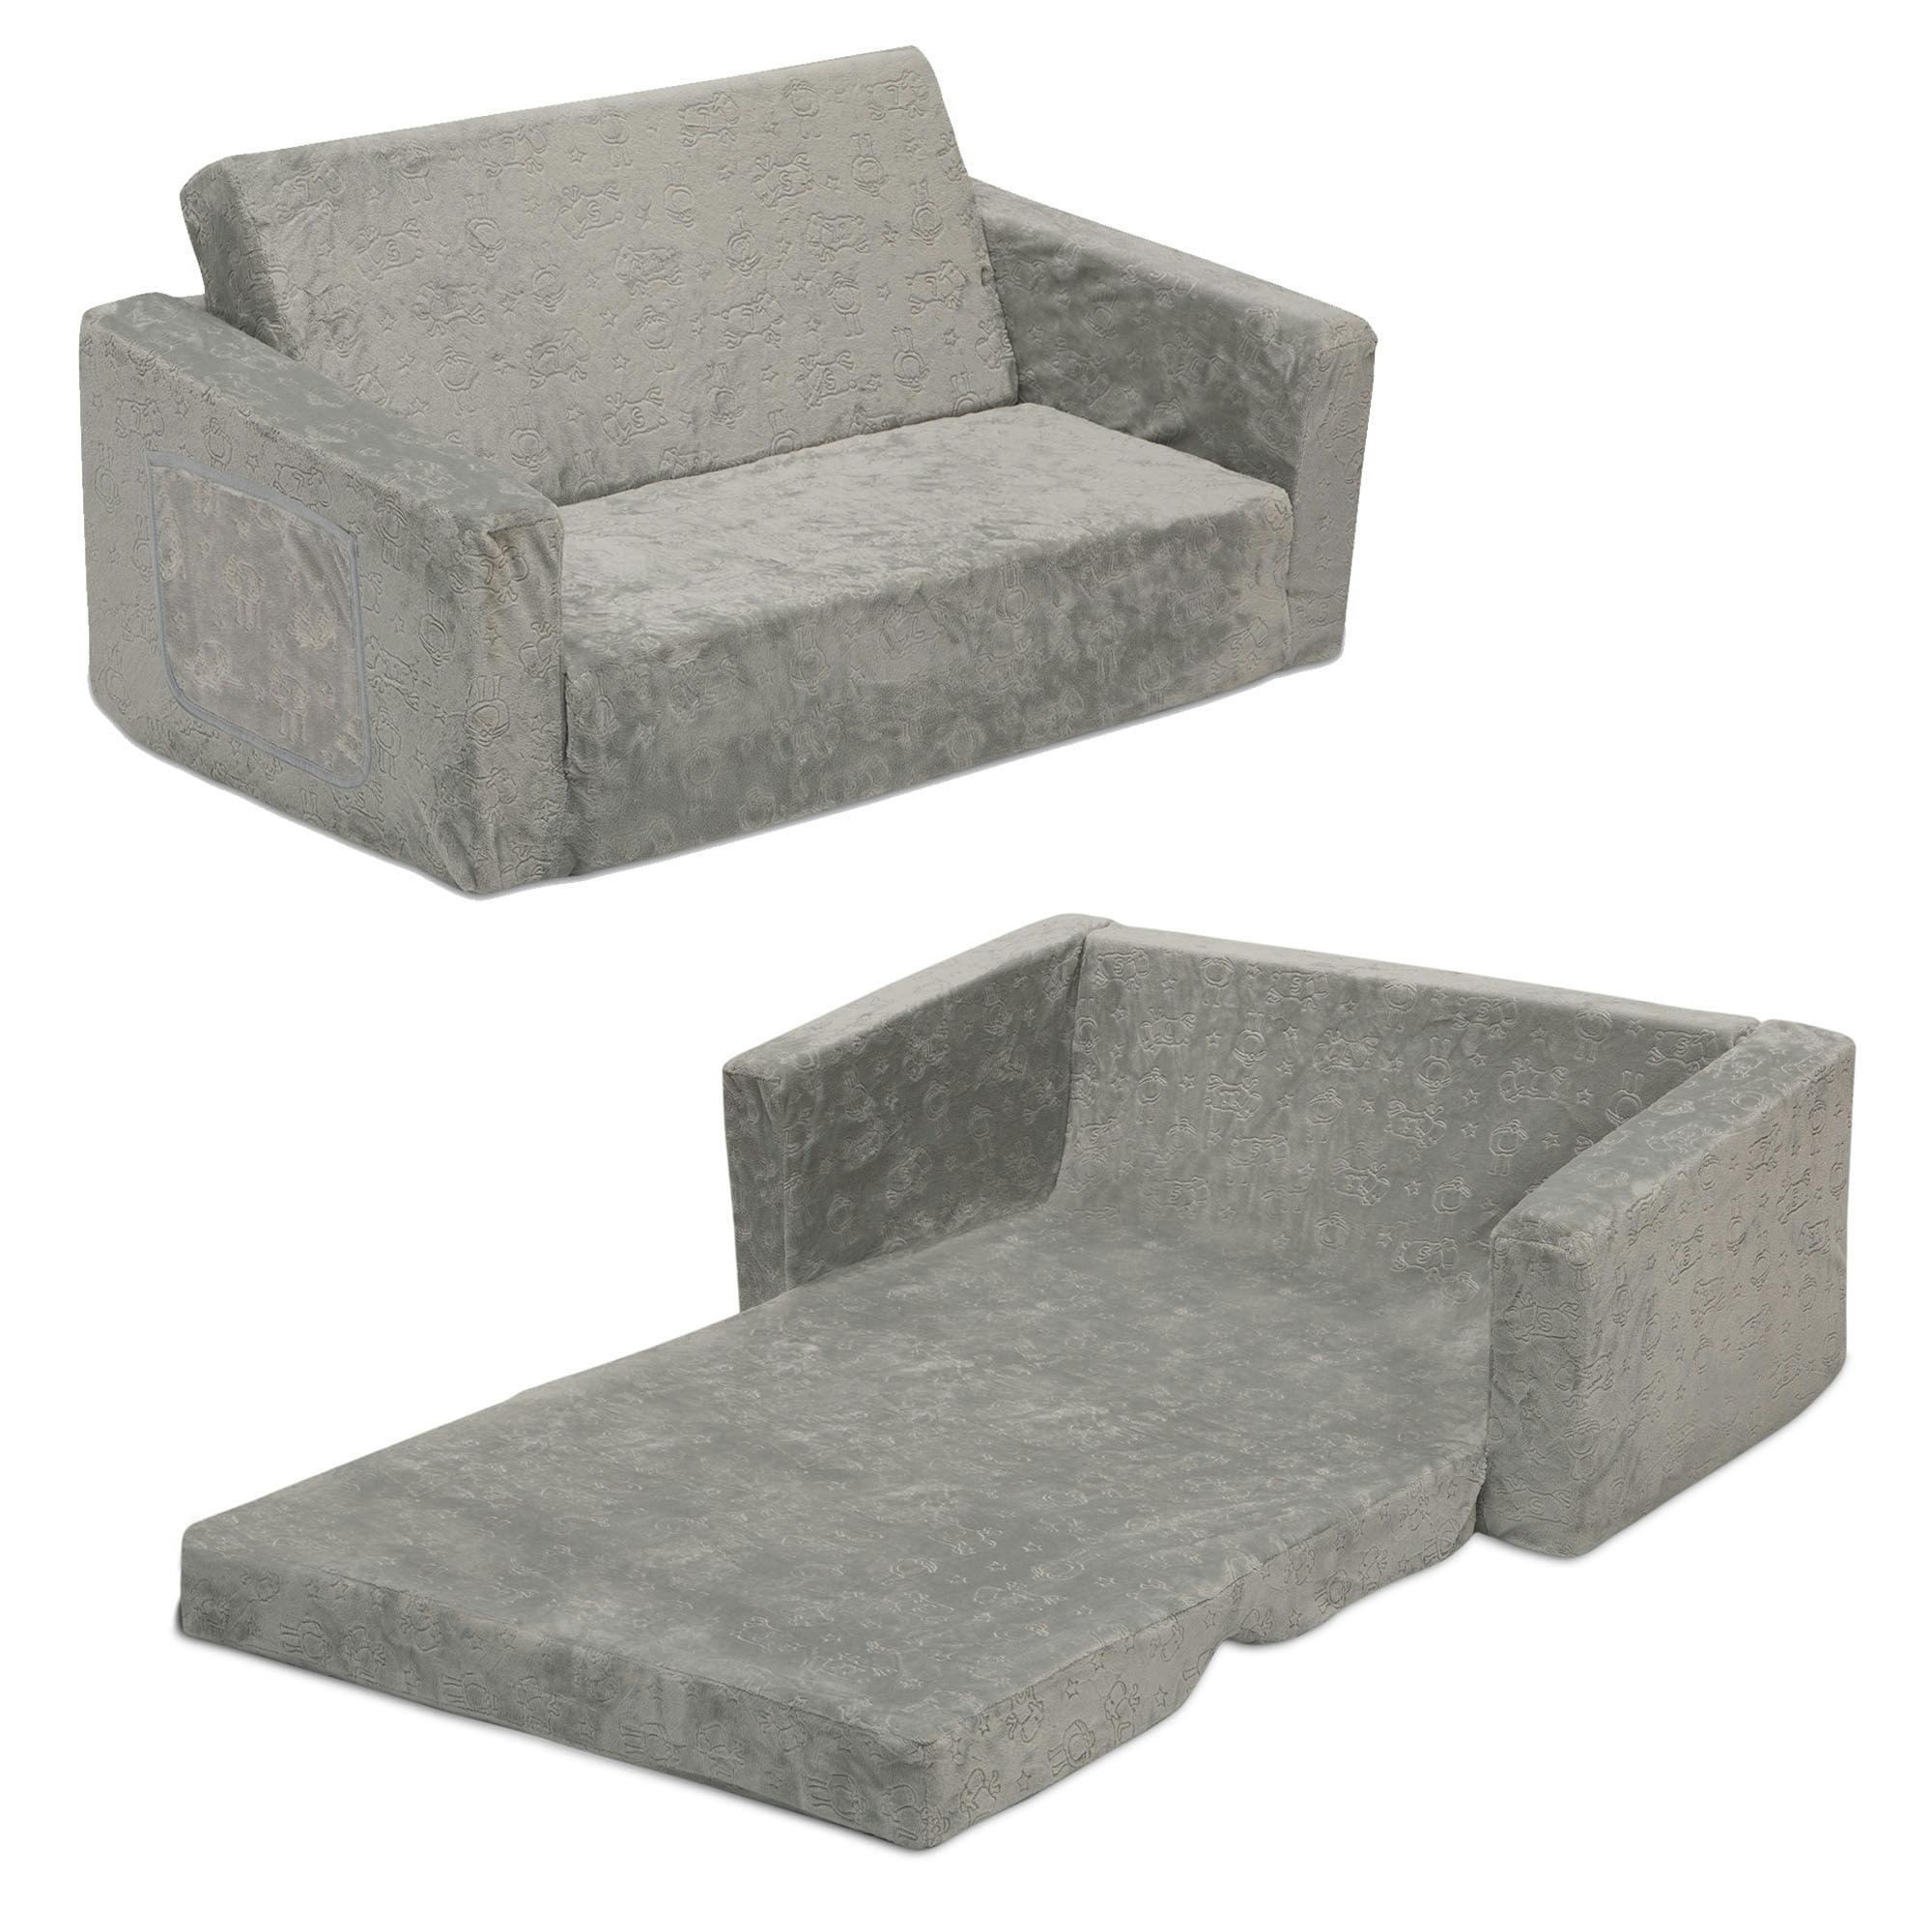 Cozy Convertible Sleeper Sofa for Kids in Soft Gray Fabric